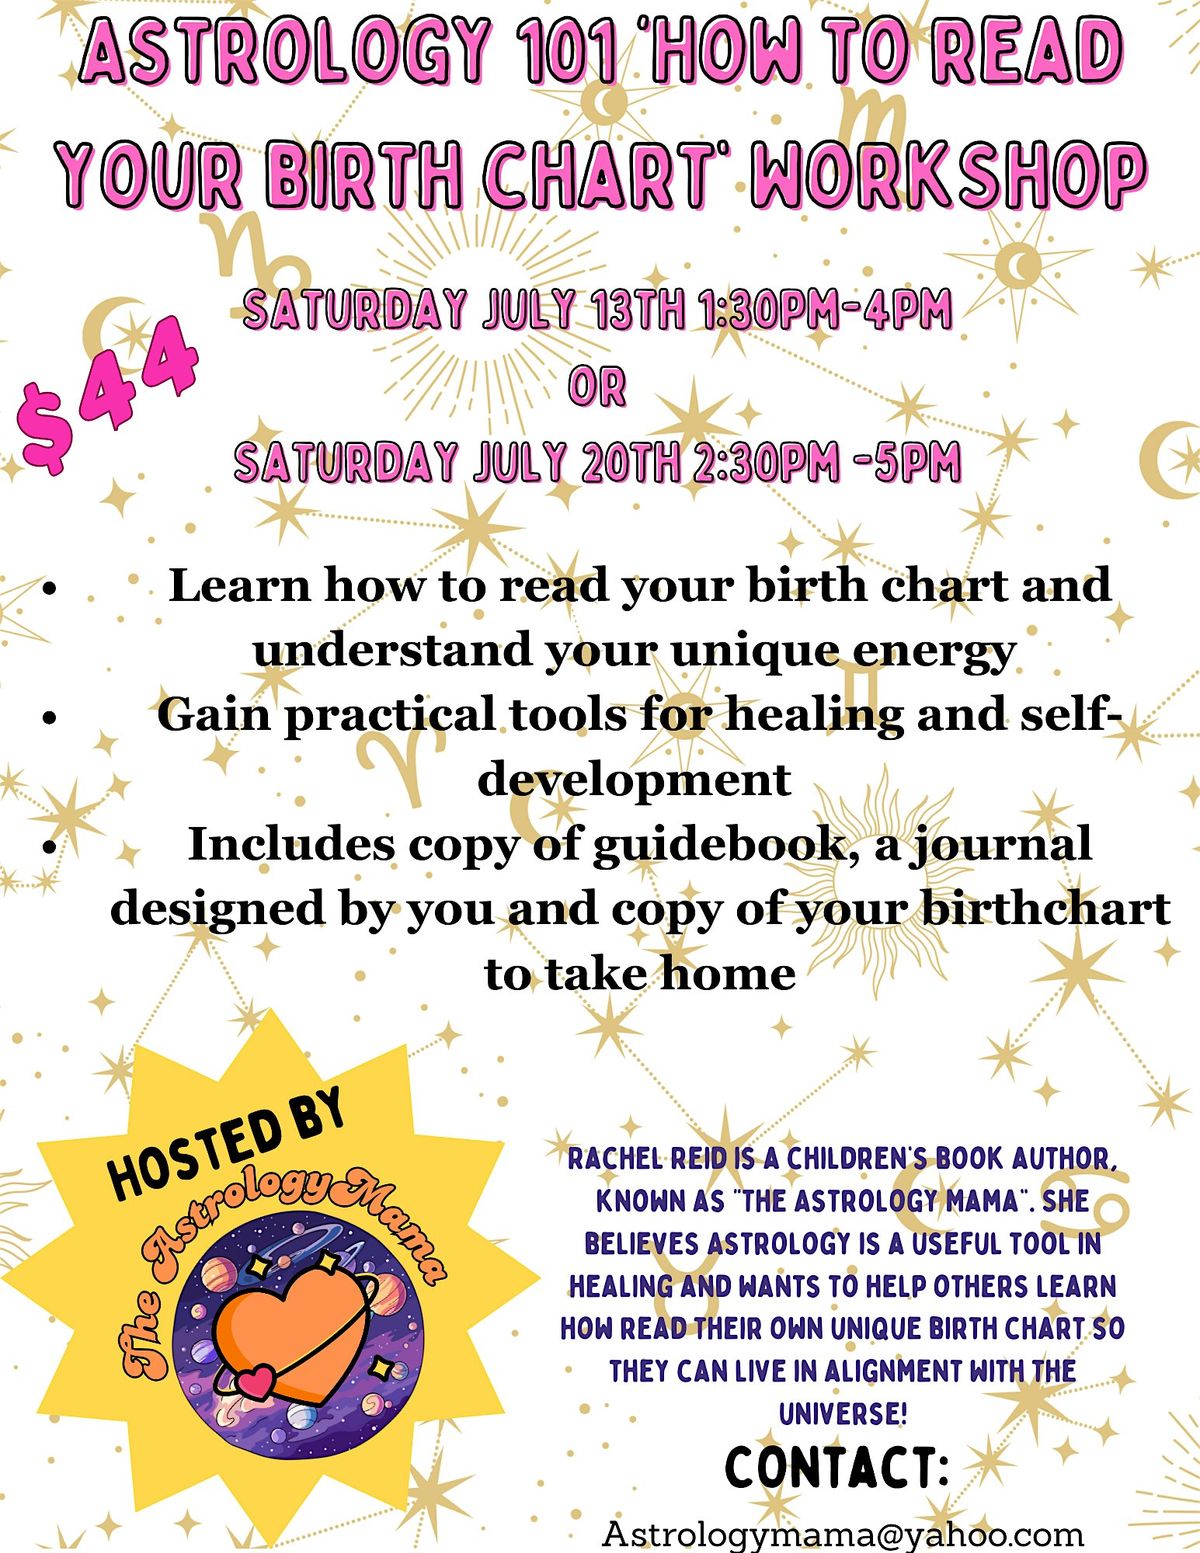 Astrology 101 - How to read your birth chart